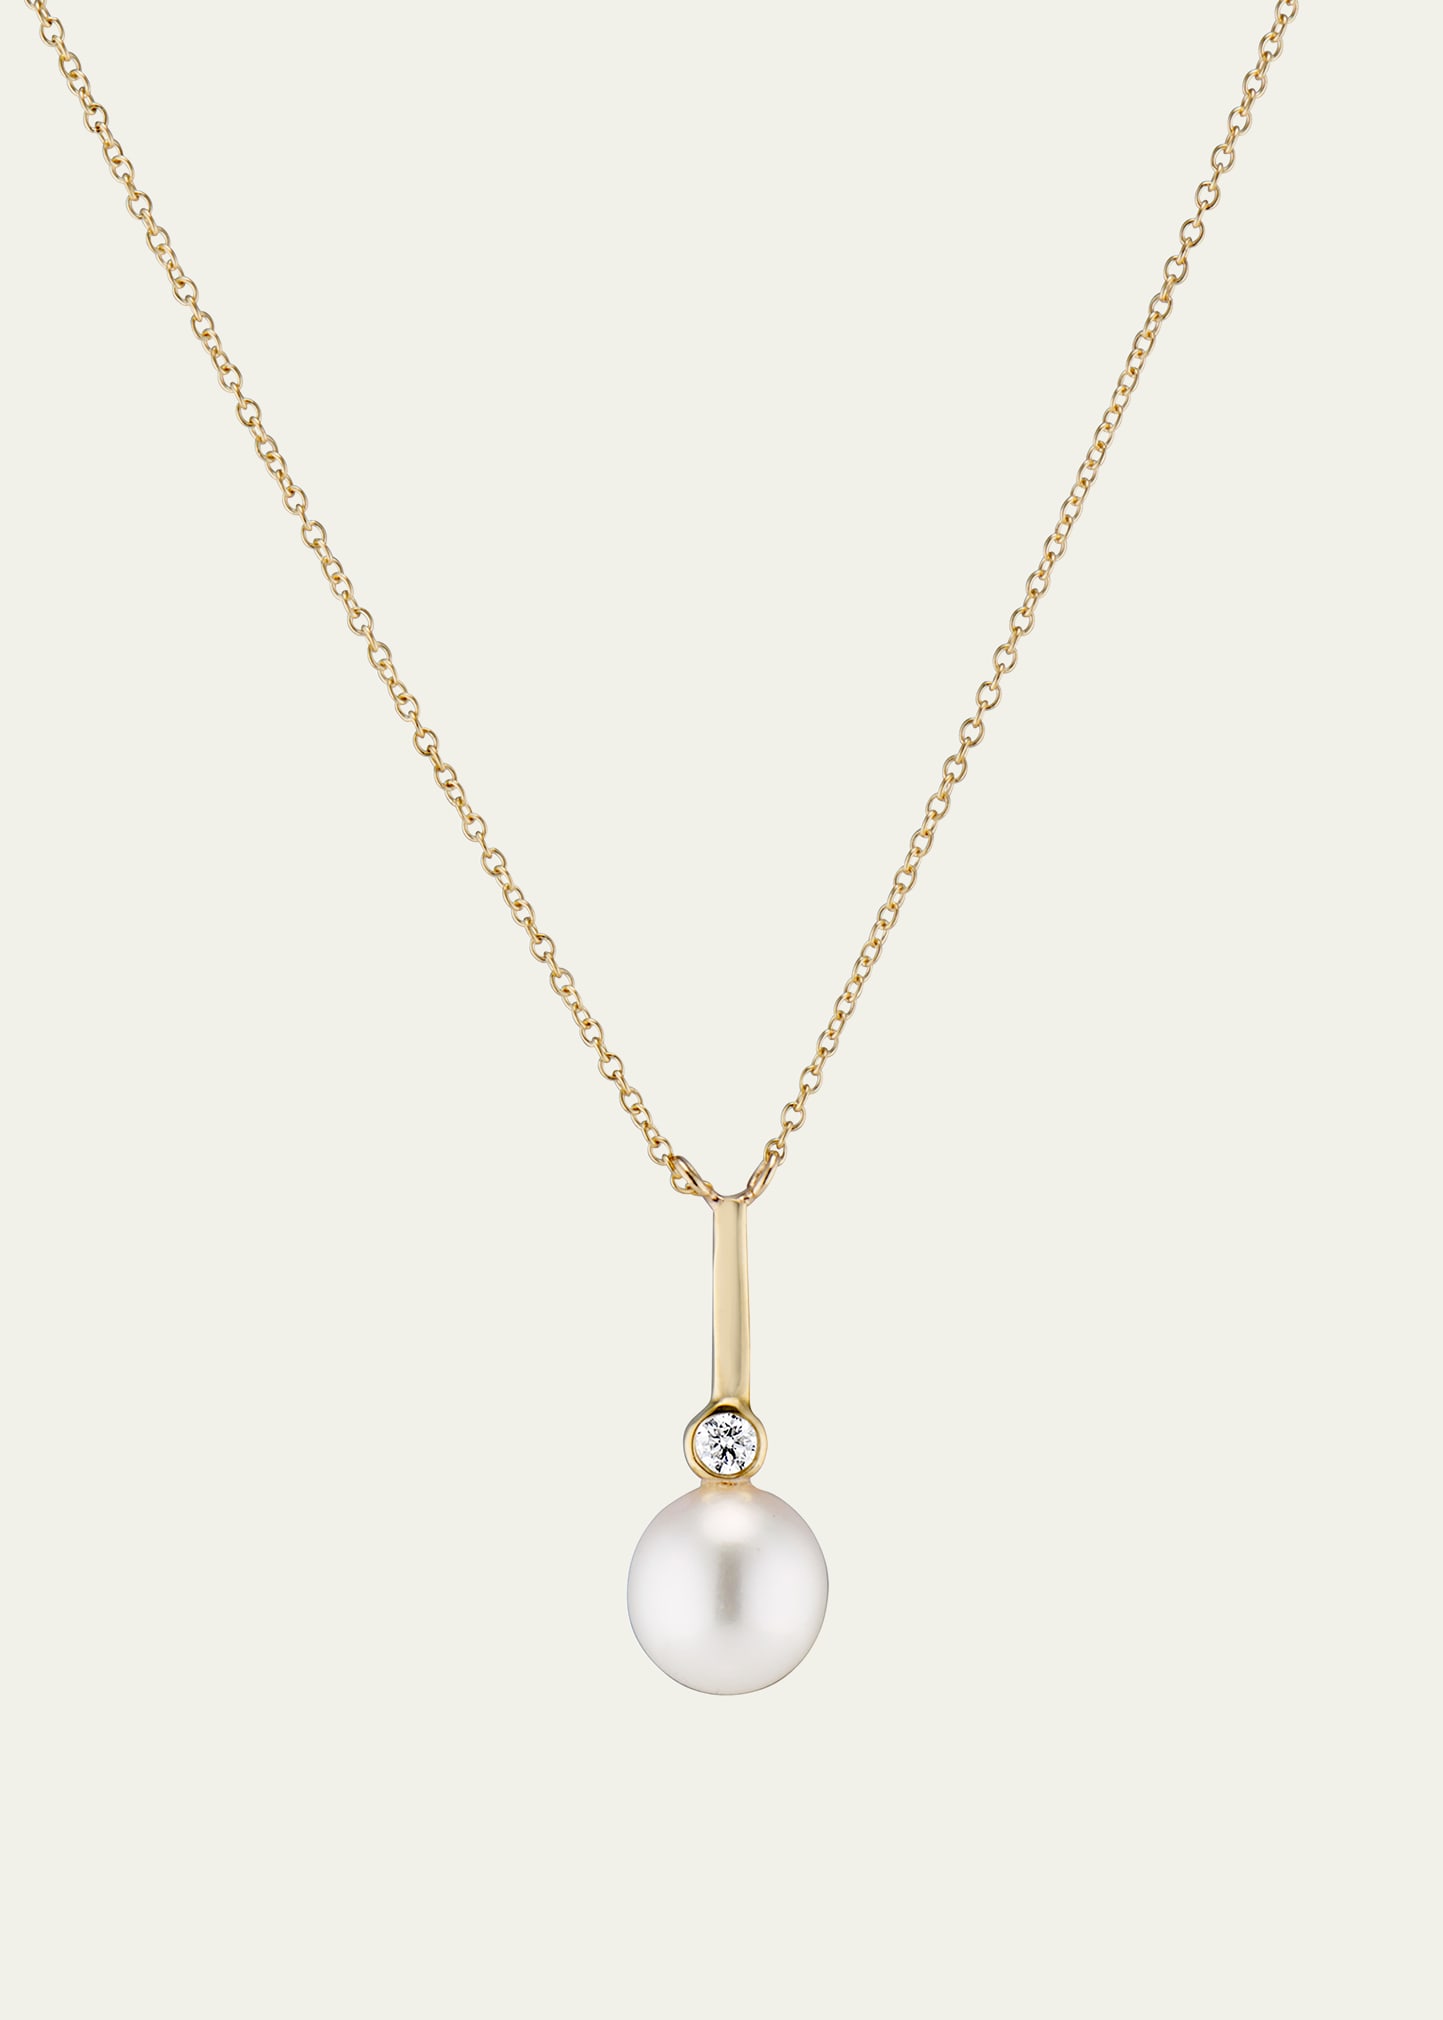 6mm Pearl and Diamond Drop Necklace in 18K Yellow Gold